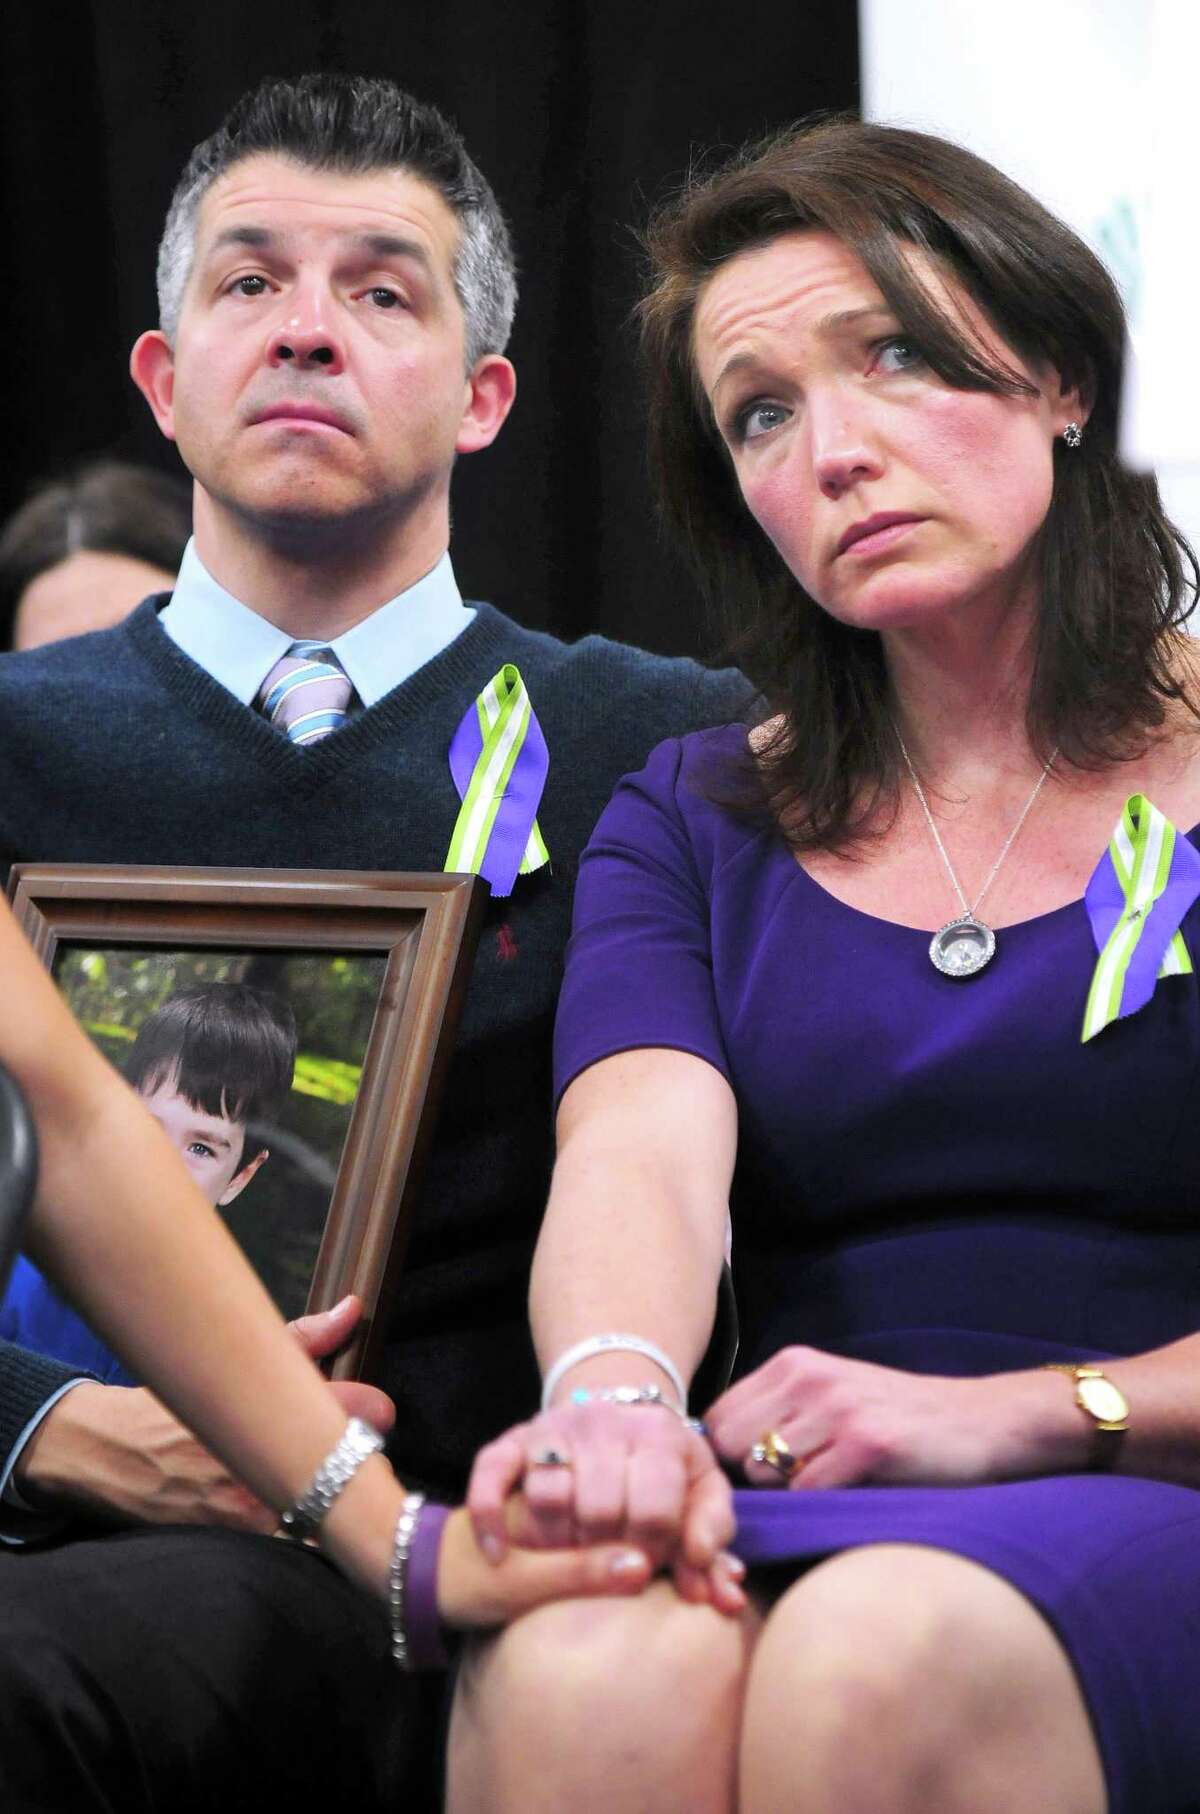 Ian Hockley (left) holding a photograph of his son, Dylan, and his wife, Nicole (right), listen to speakers a press conference announcing the launch of Sandy Hook Promise at Edmond Town Hall in Newtown on 1/14/2013. Dylan was killed in the Sandy Hook Elementary School shootings. Photo by Arnold Gold/New Haven Register